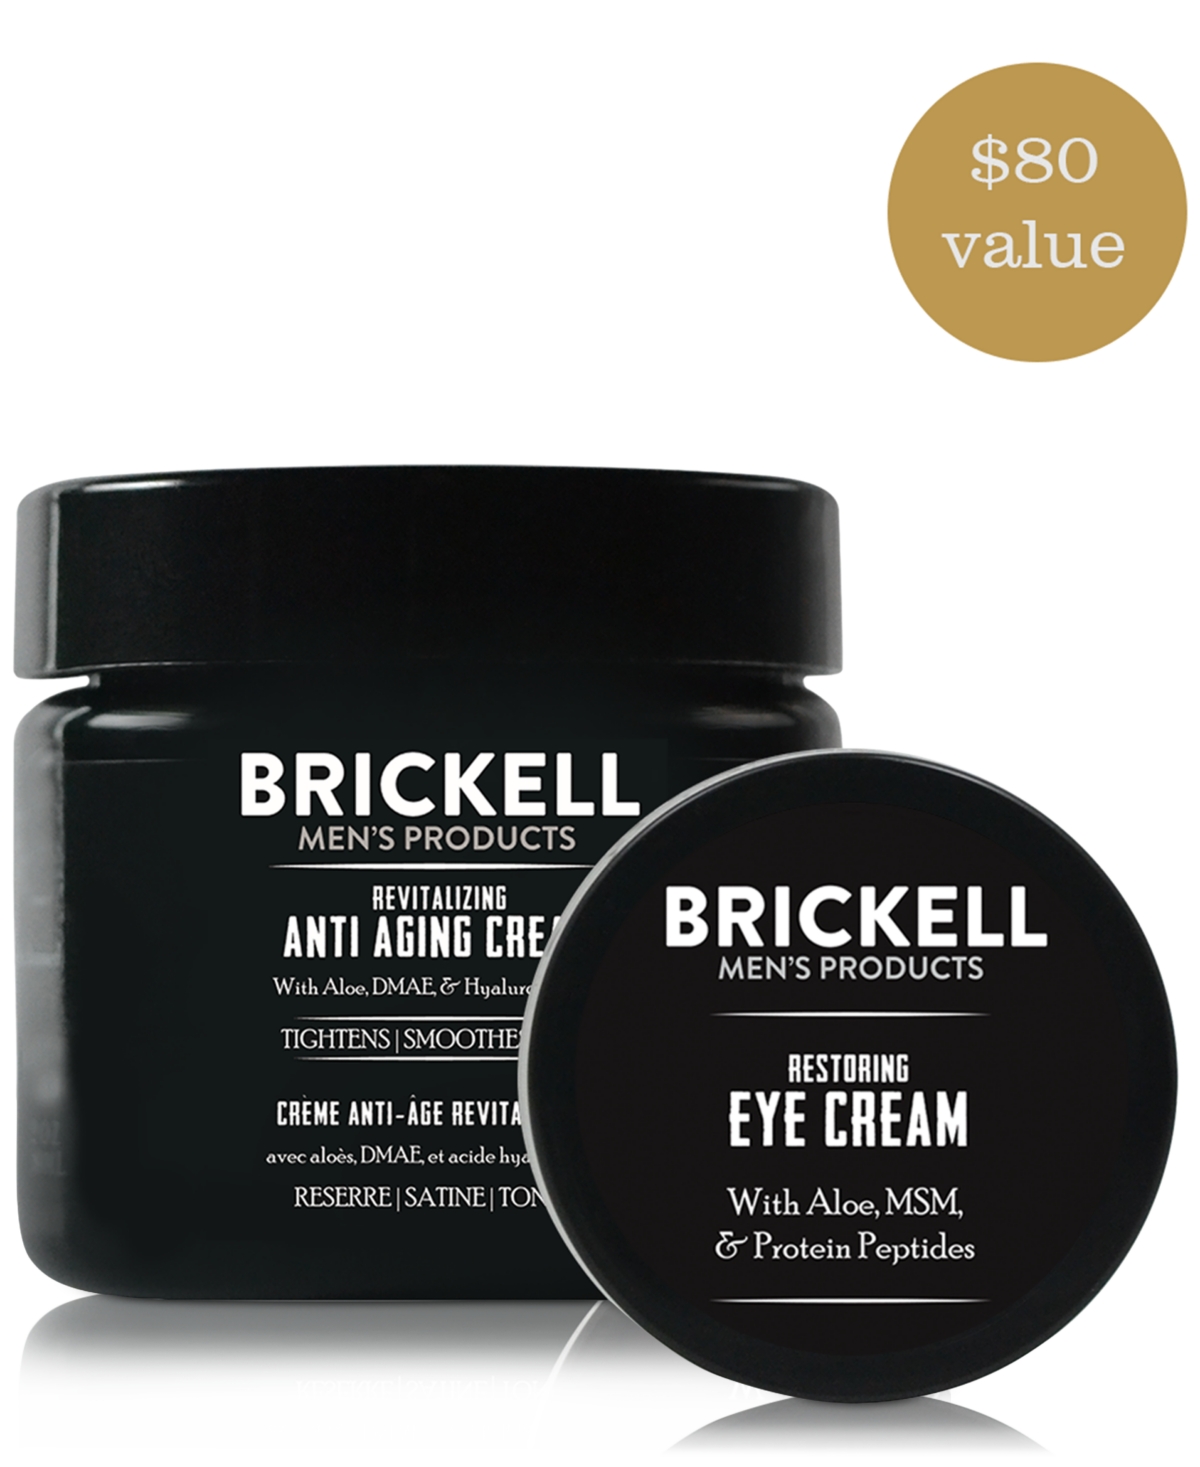 Brickell Mens Products Brickell Men's Products 2-pc. Ultimate Men's Skincare Set